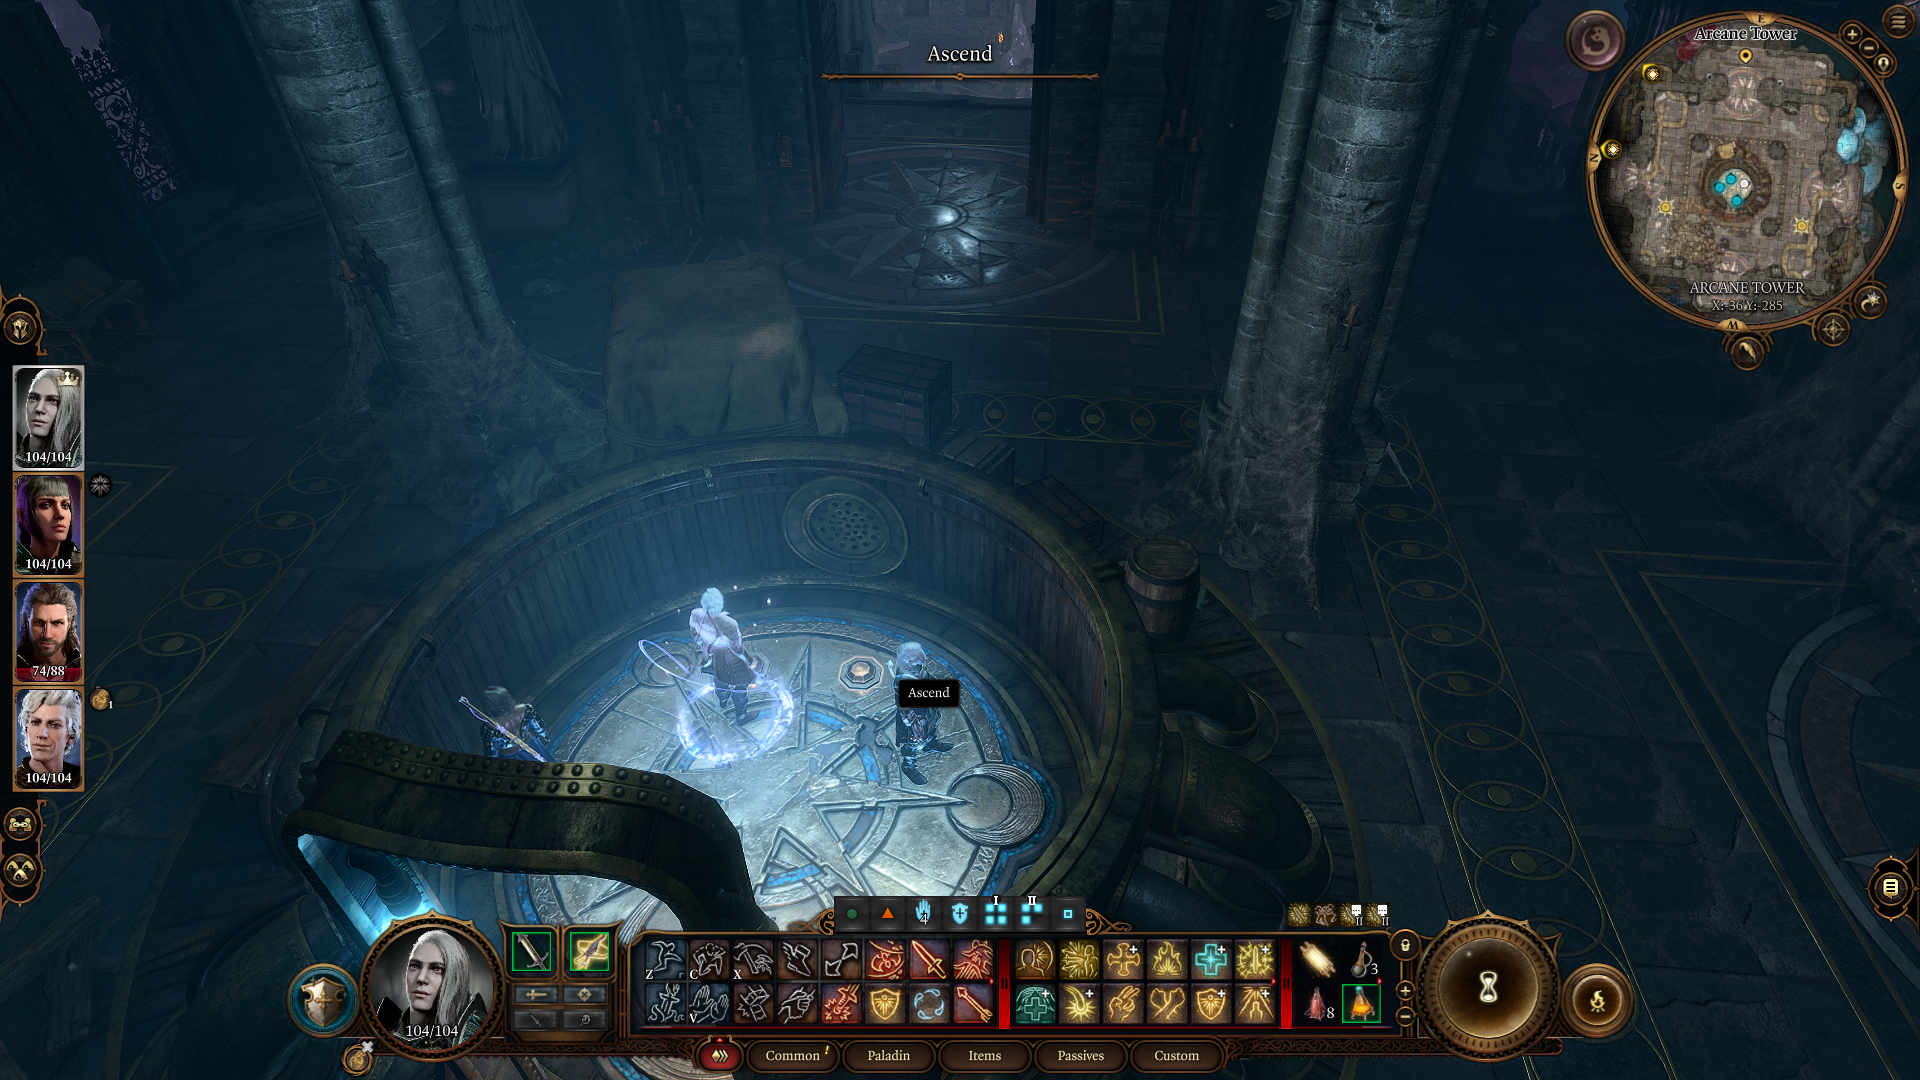 Image of the elevator in the Arcane Tower in BG3.